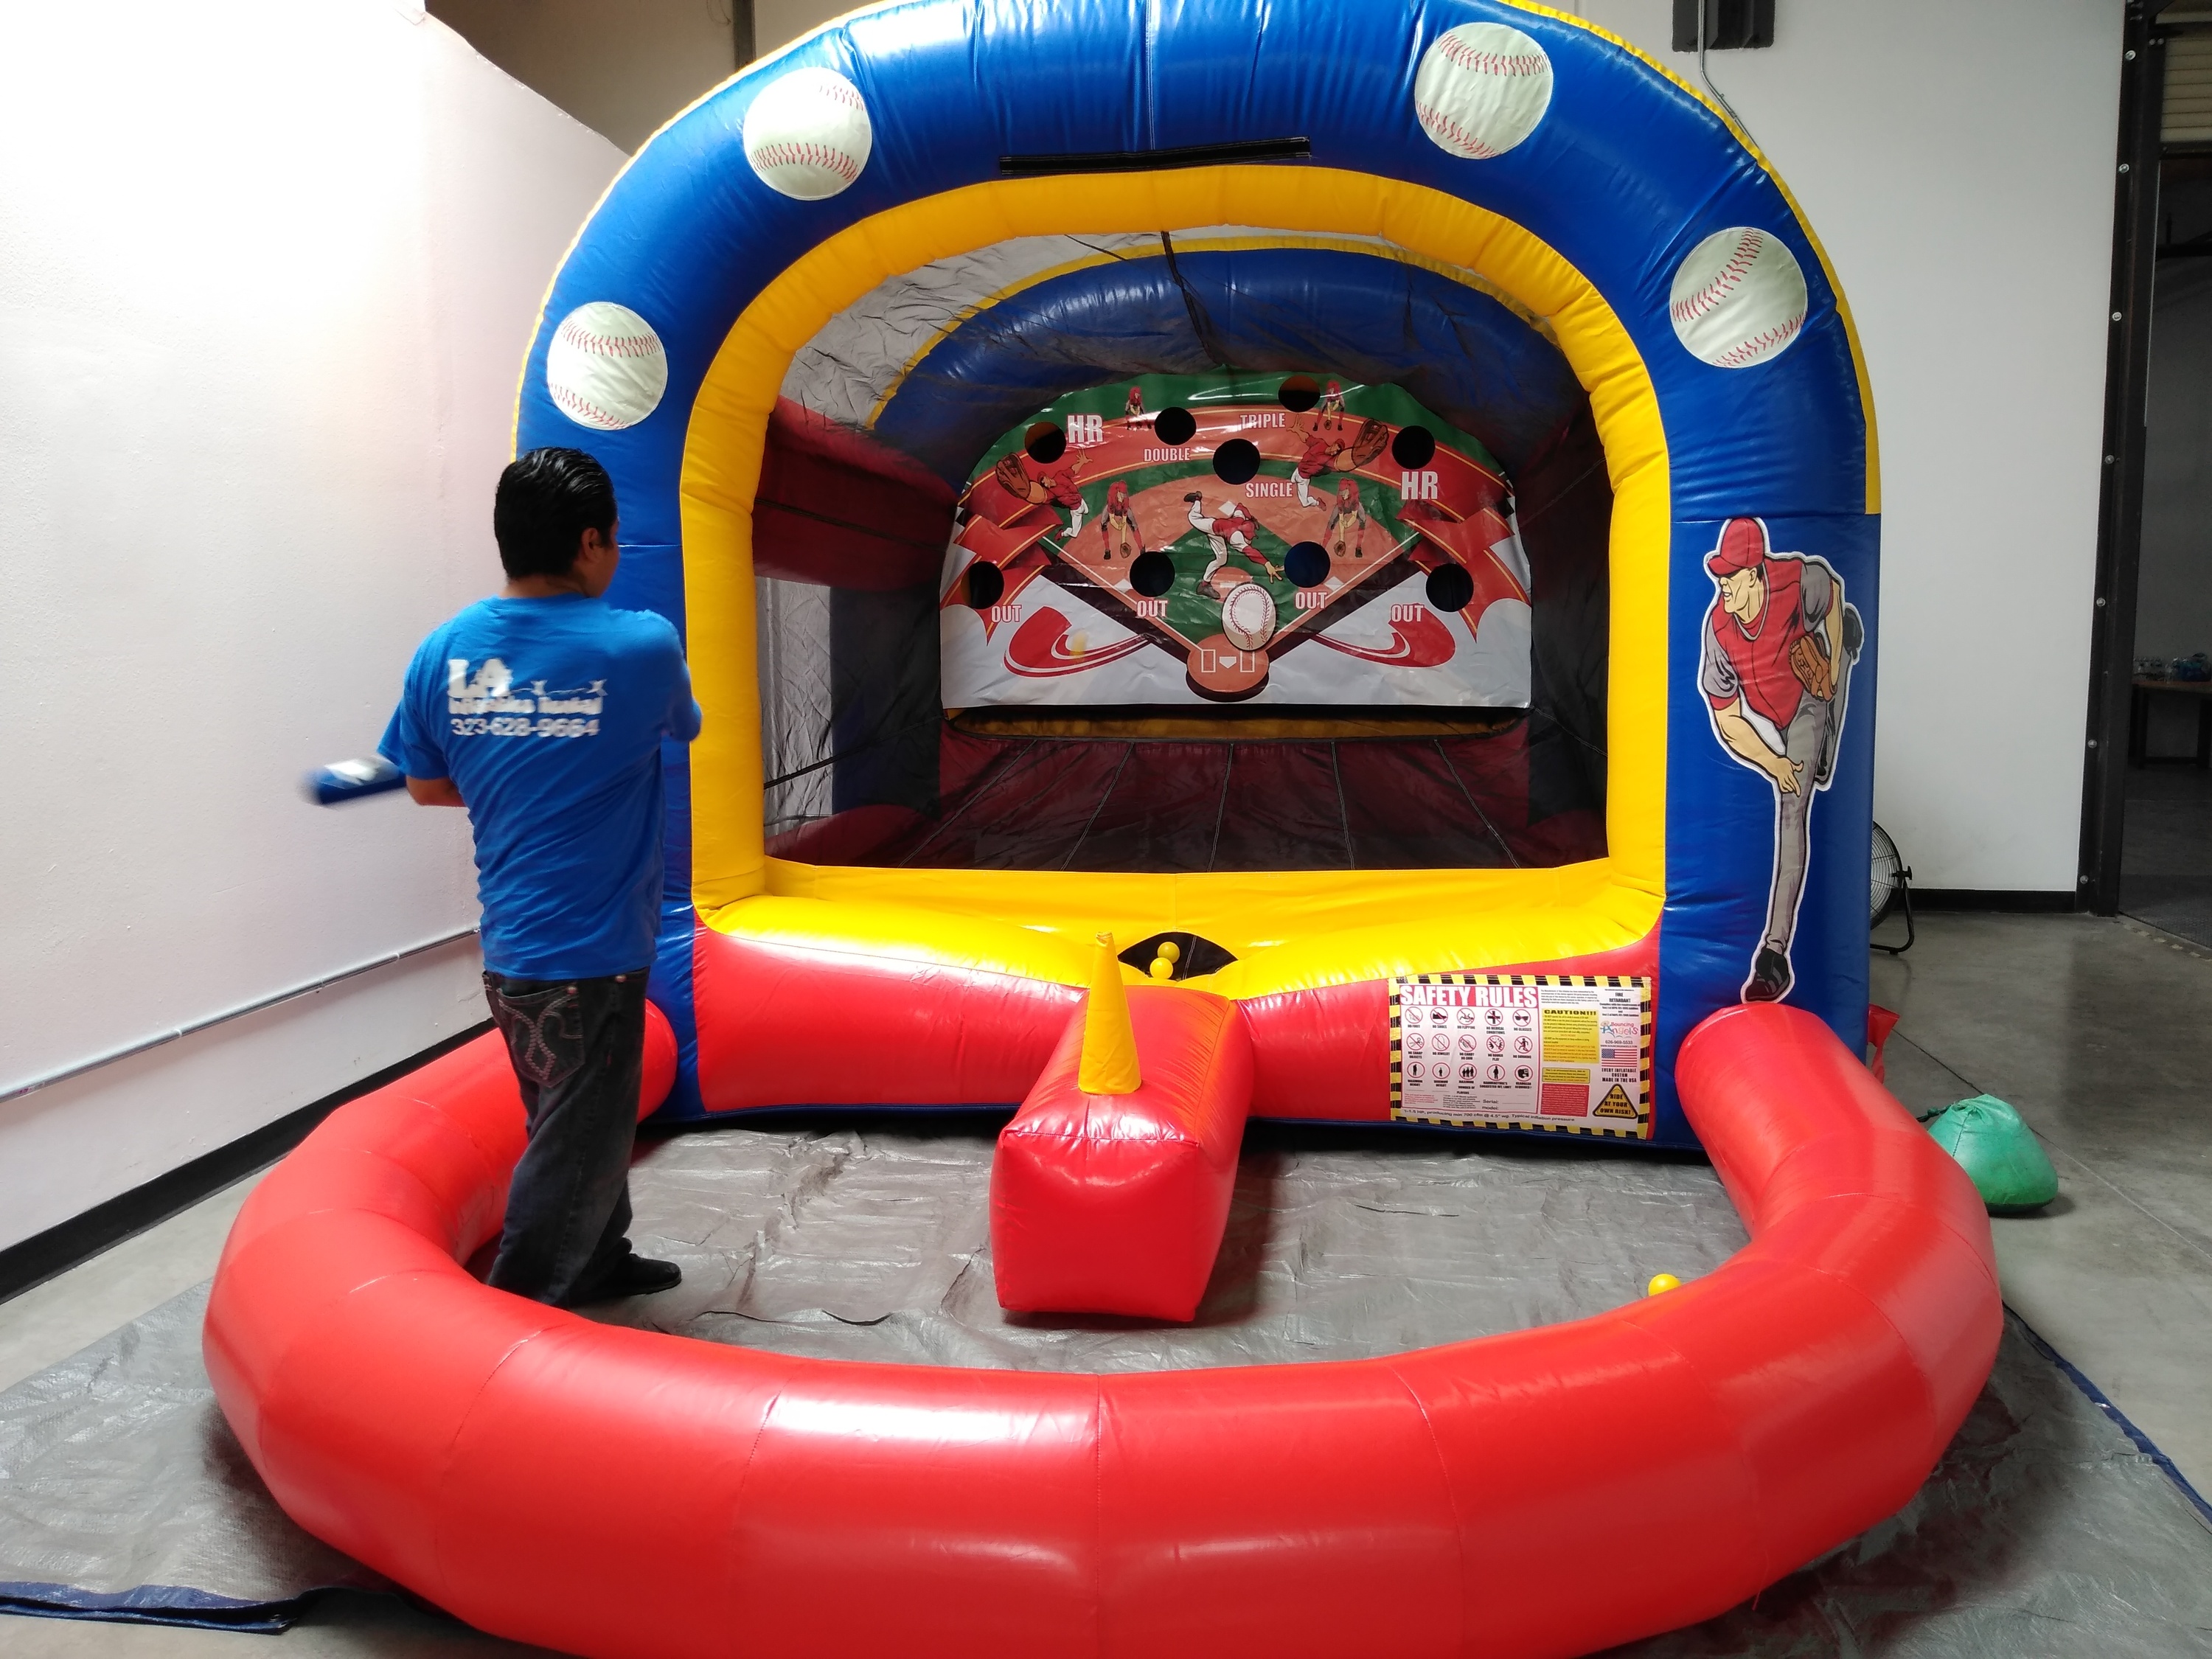 Inflatable Baseball Game Rental in Los Angeles - L.A Inflatables Rental